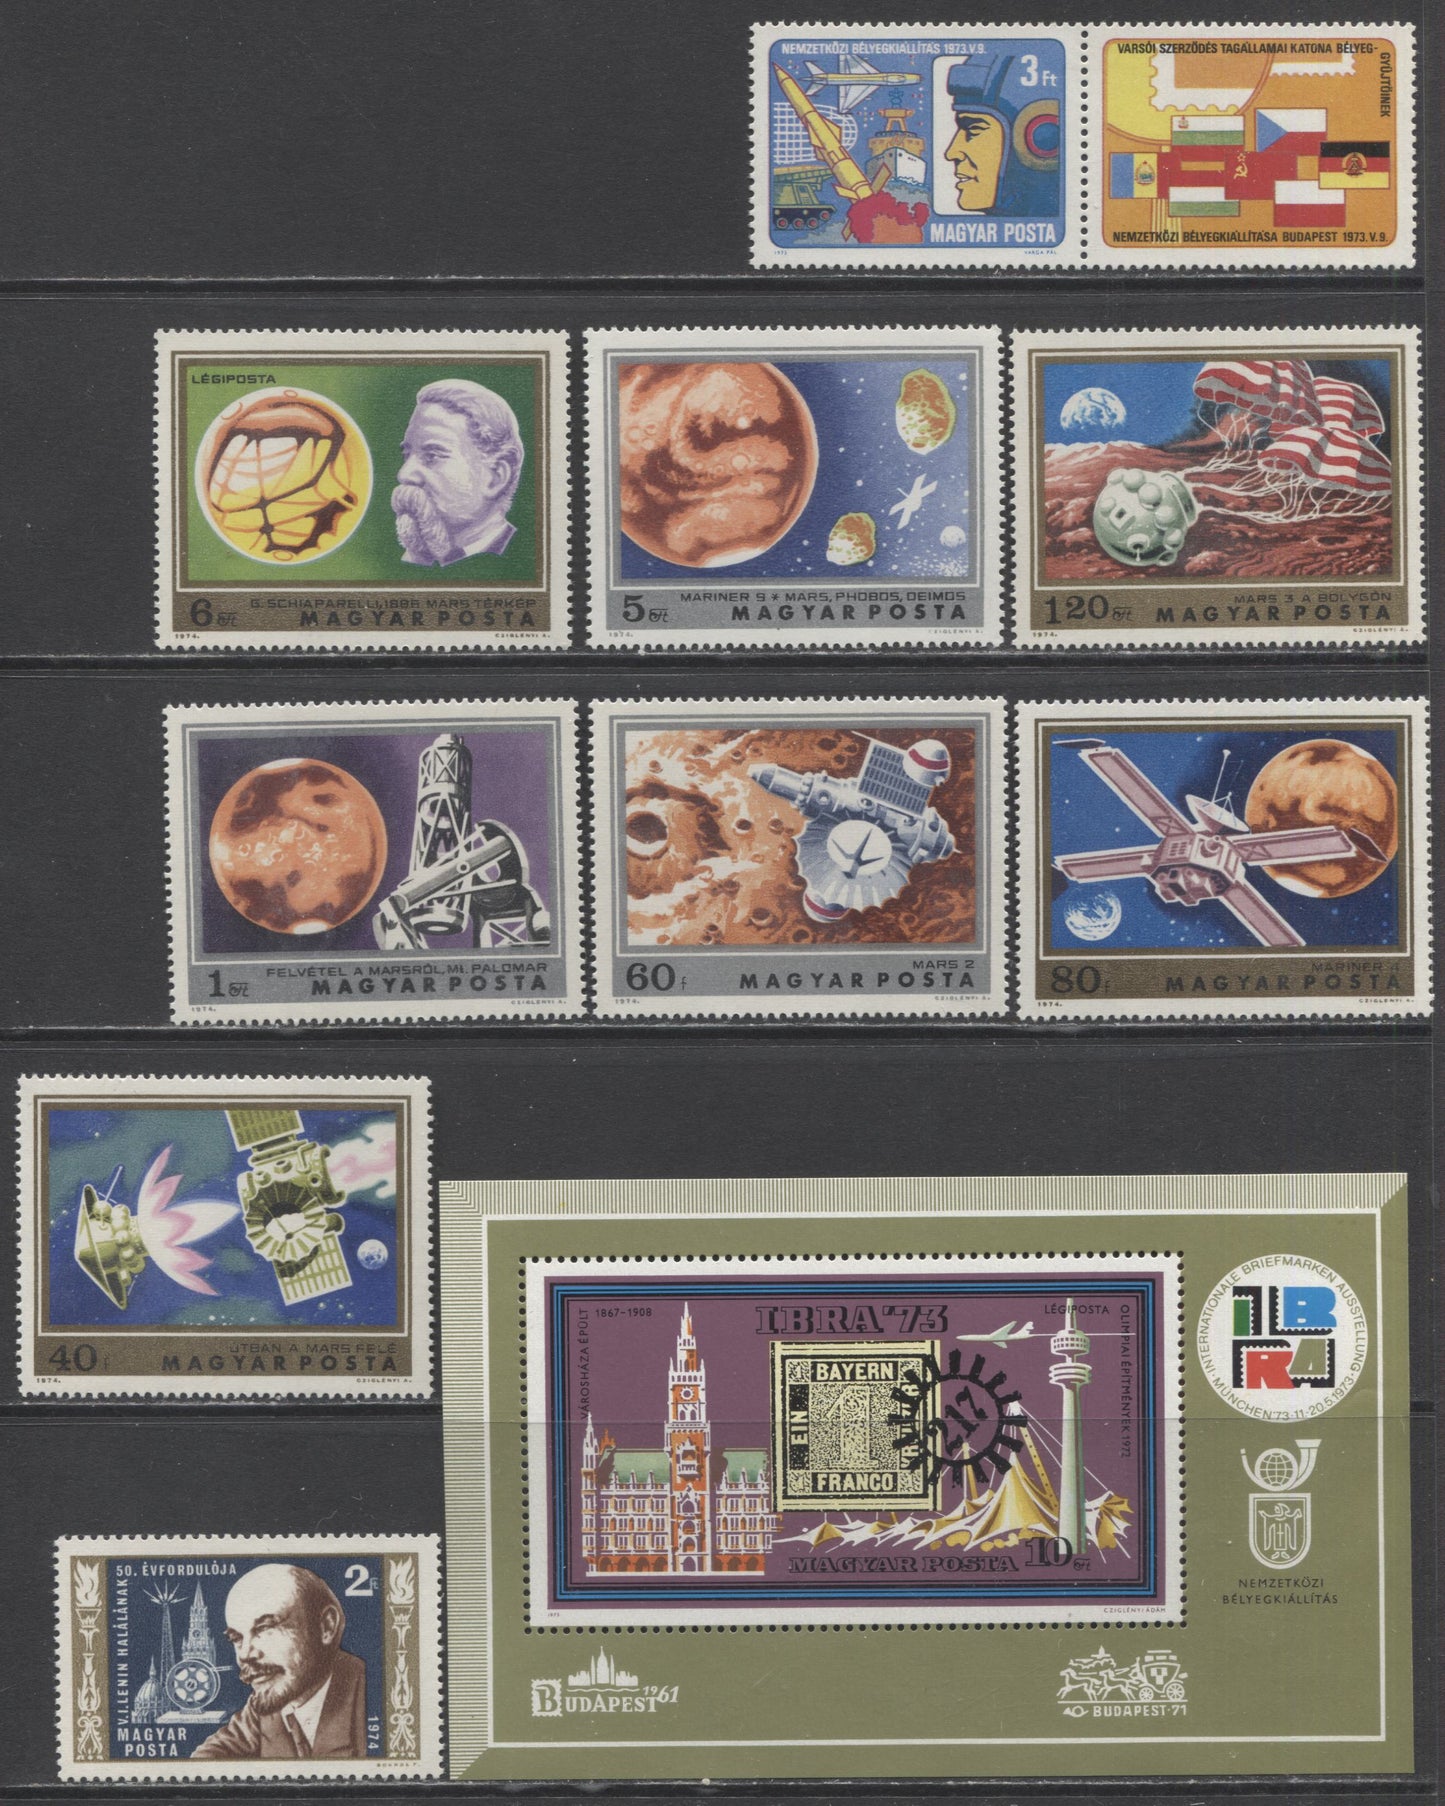 Lot 109 Hungary SC#2221/C345 1973 Commemoratives & Airmail Issues, A VFNH Range Of Singles, Souvenir Sheet & Pair, 2017 Scott Cat. $8.5 USD, Click on Listing to See ALL Pictures